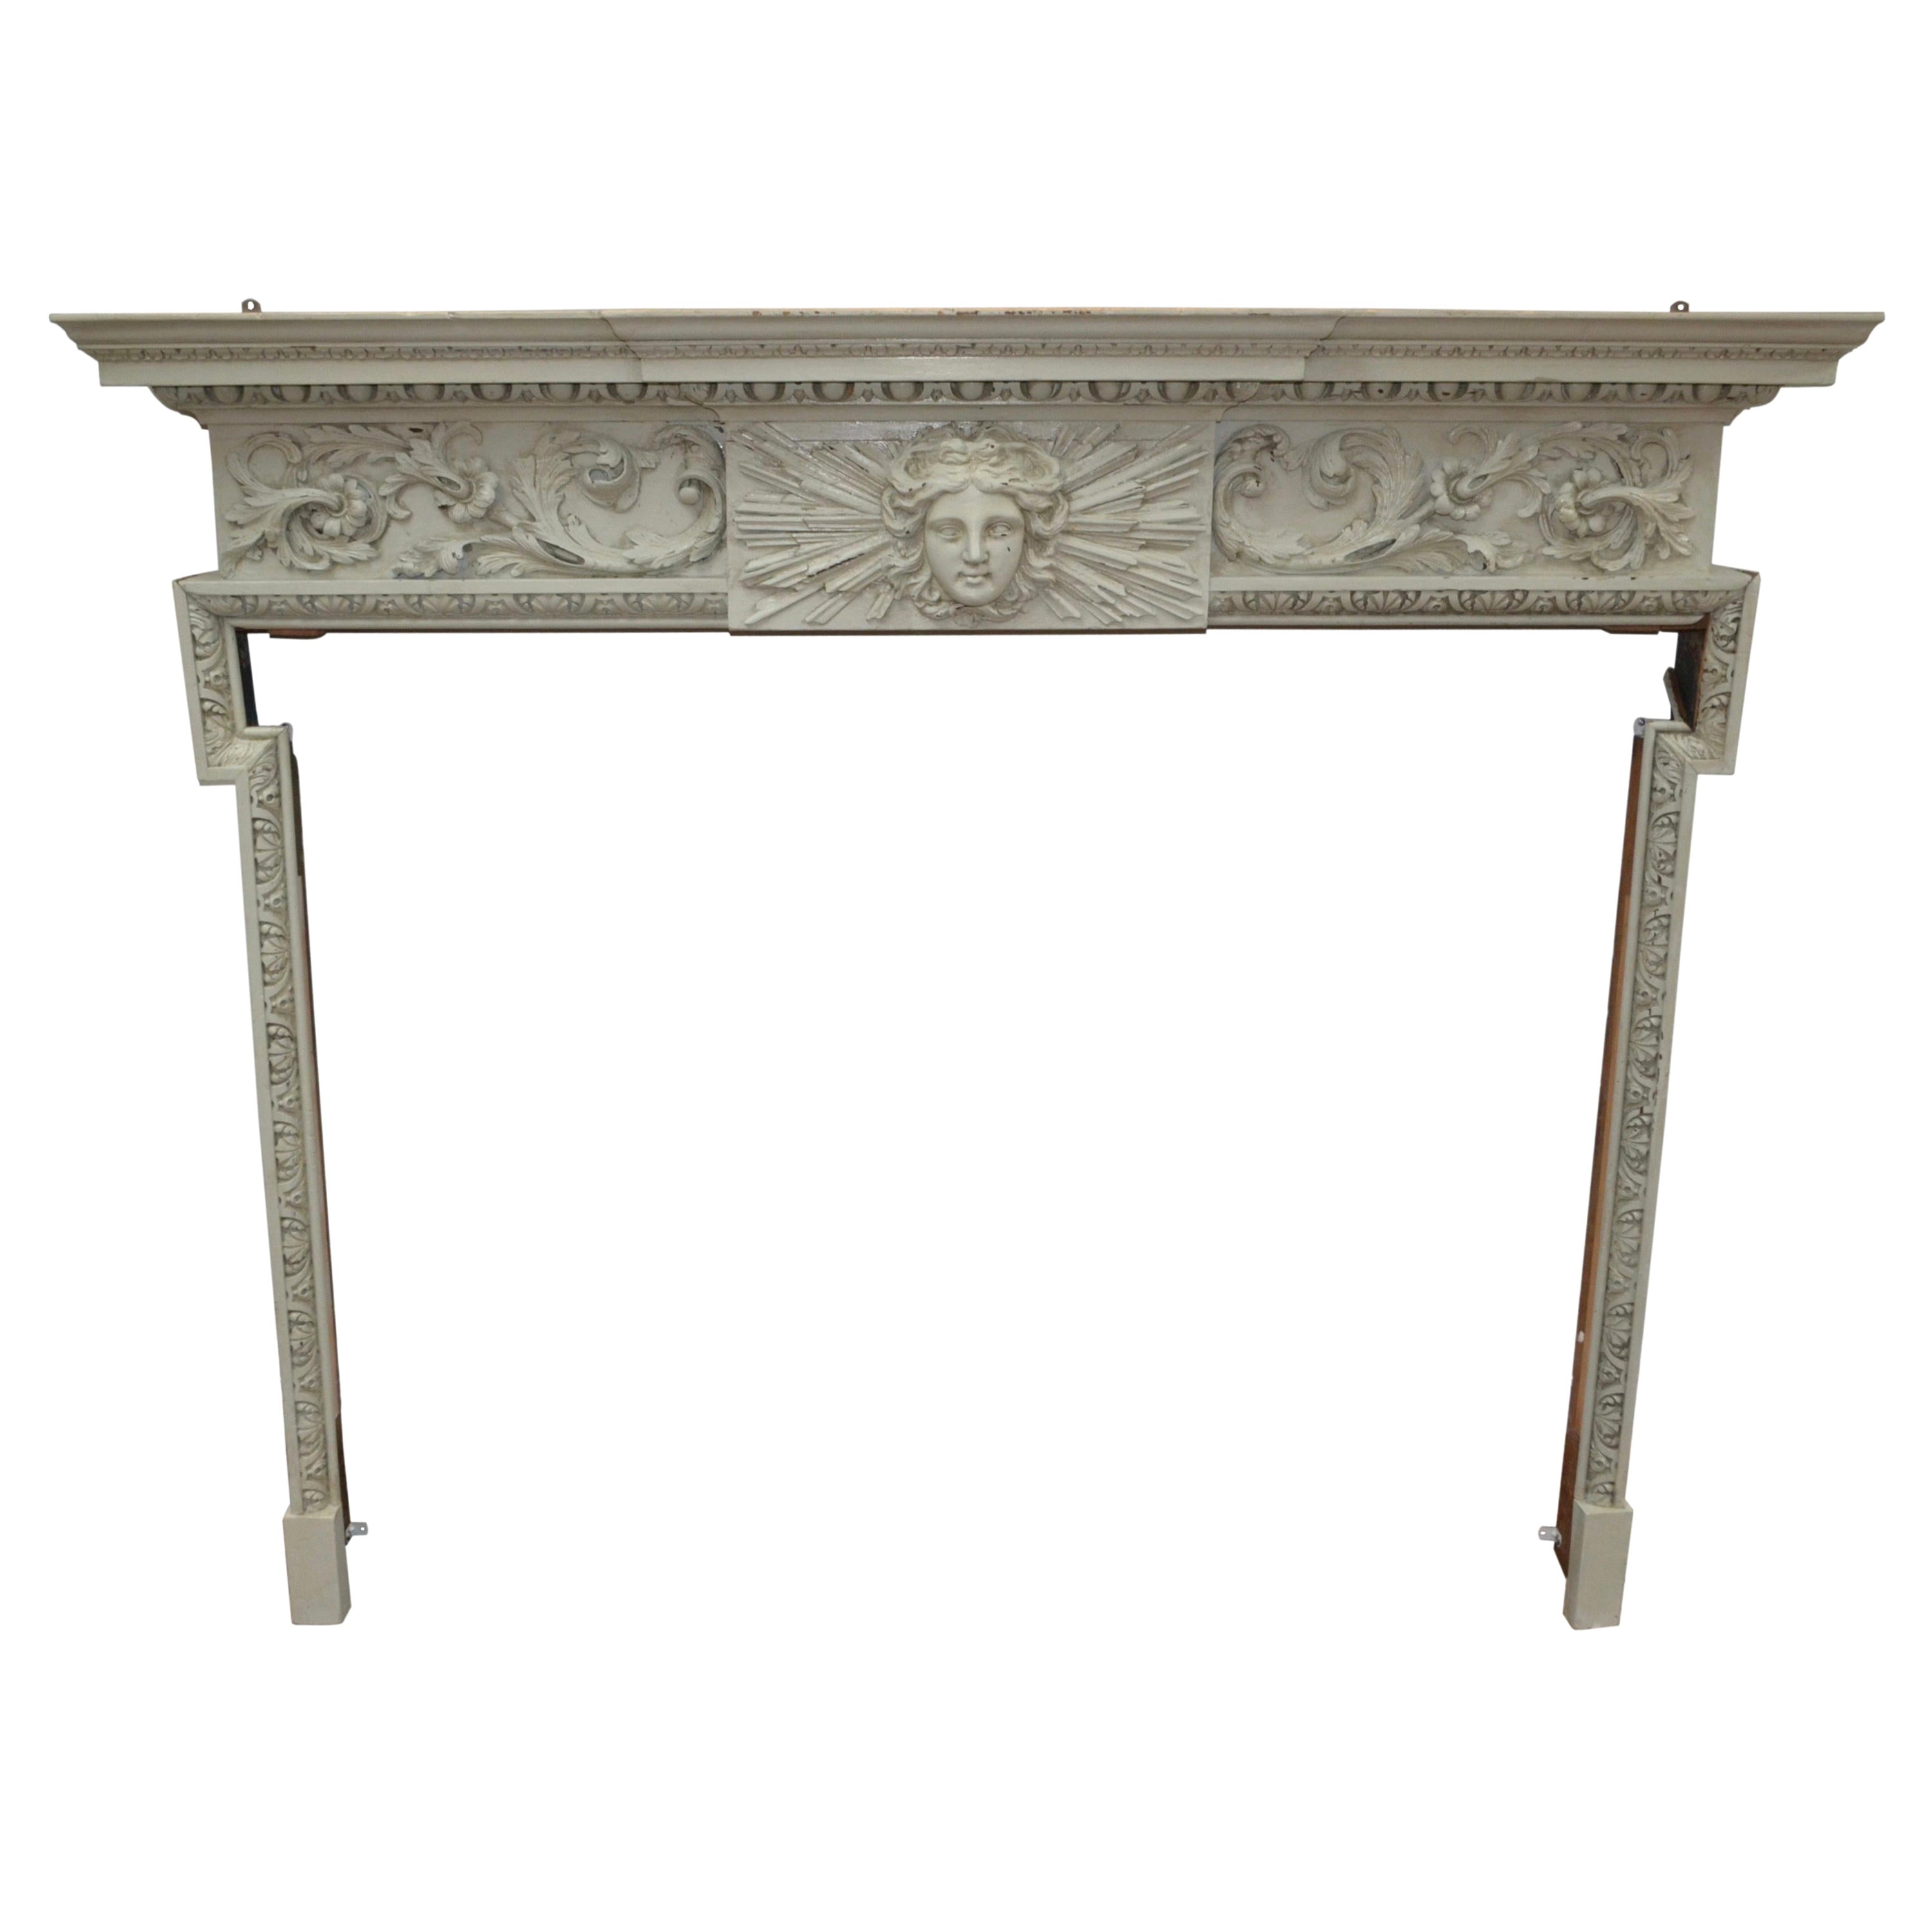 Carved and Painted Pinewood, 18 Century Fireplace Mantle or Chimneypiece